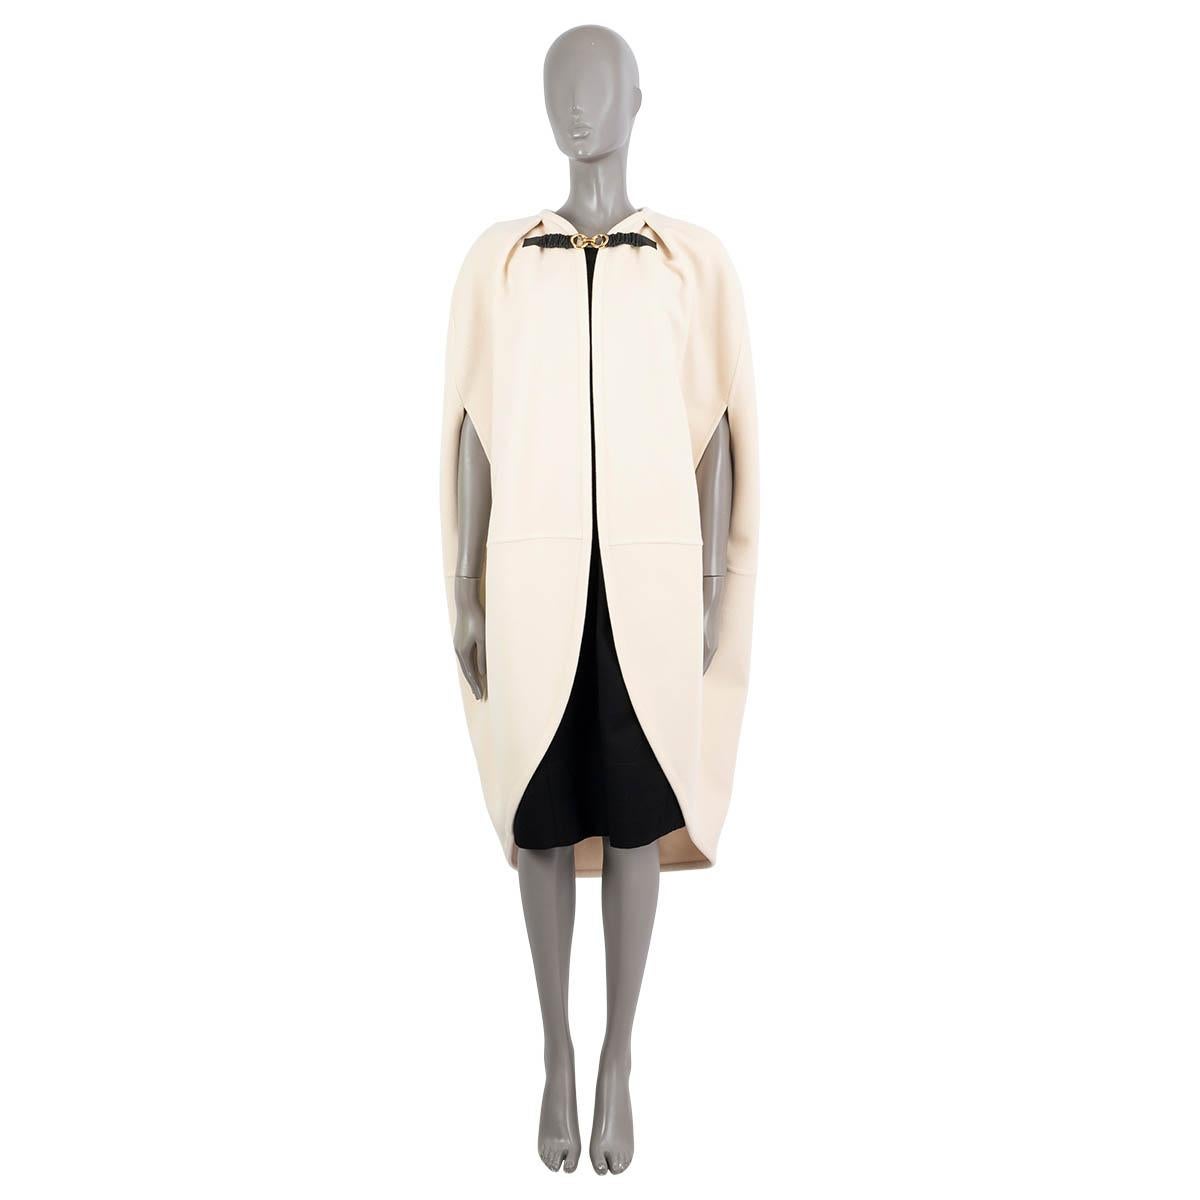 100% authentic Jil Sander cape in ivory cashmere (100%). Features as pleat detail on the front and back. Closes with a gold buckle and black leather band on the neck. Unlined. Has been carried and comes with tag.

2021 Fall/Winter

Measurements
Tag